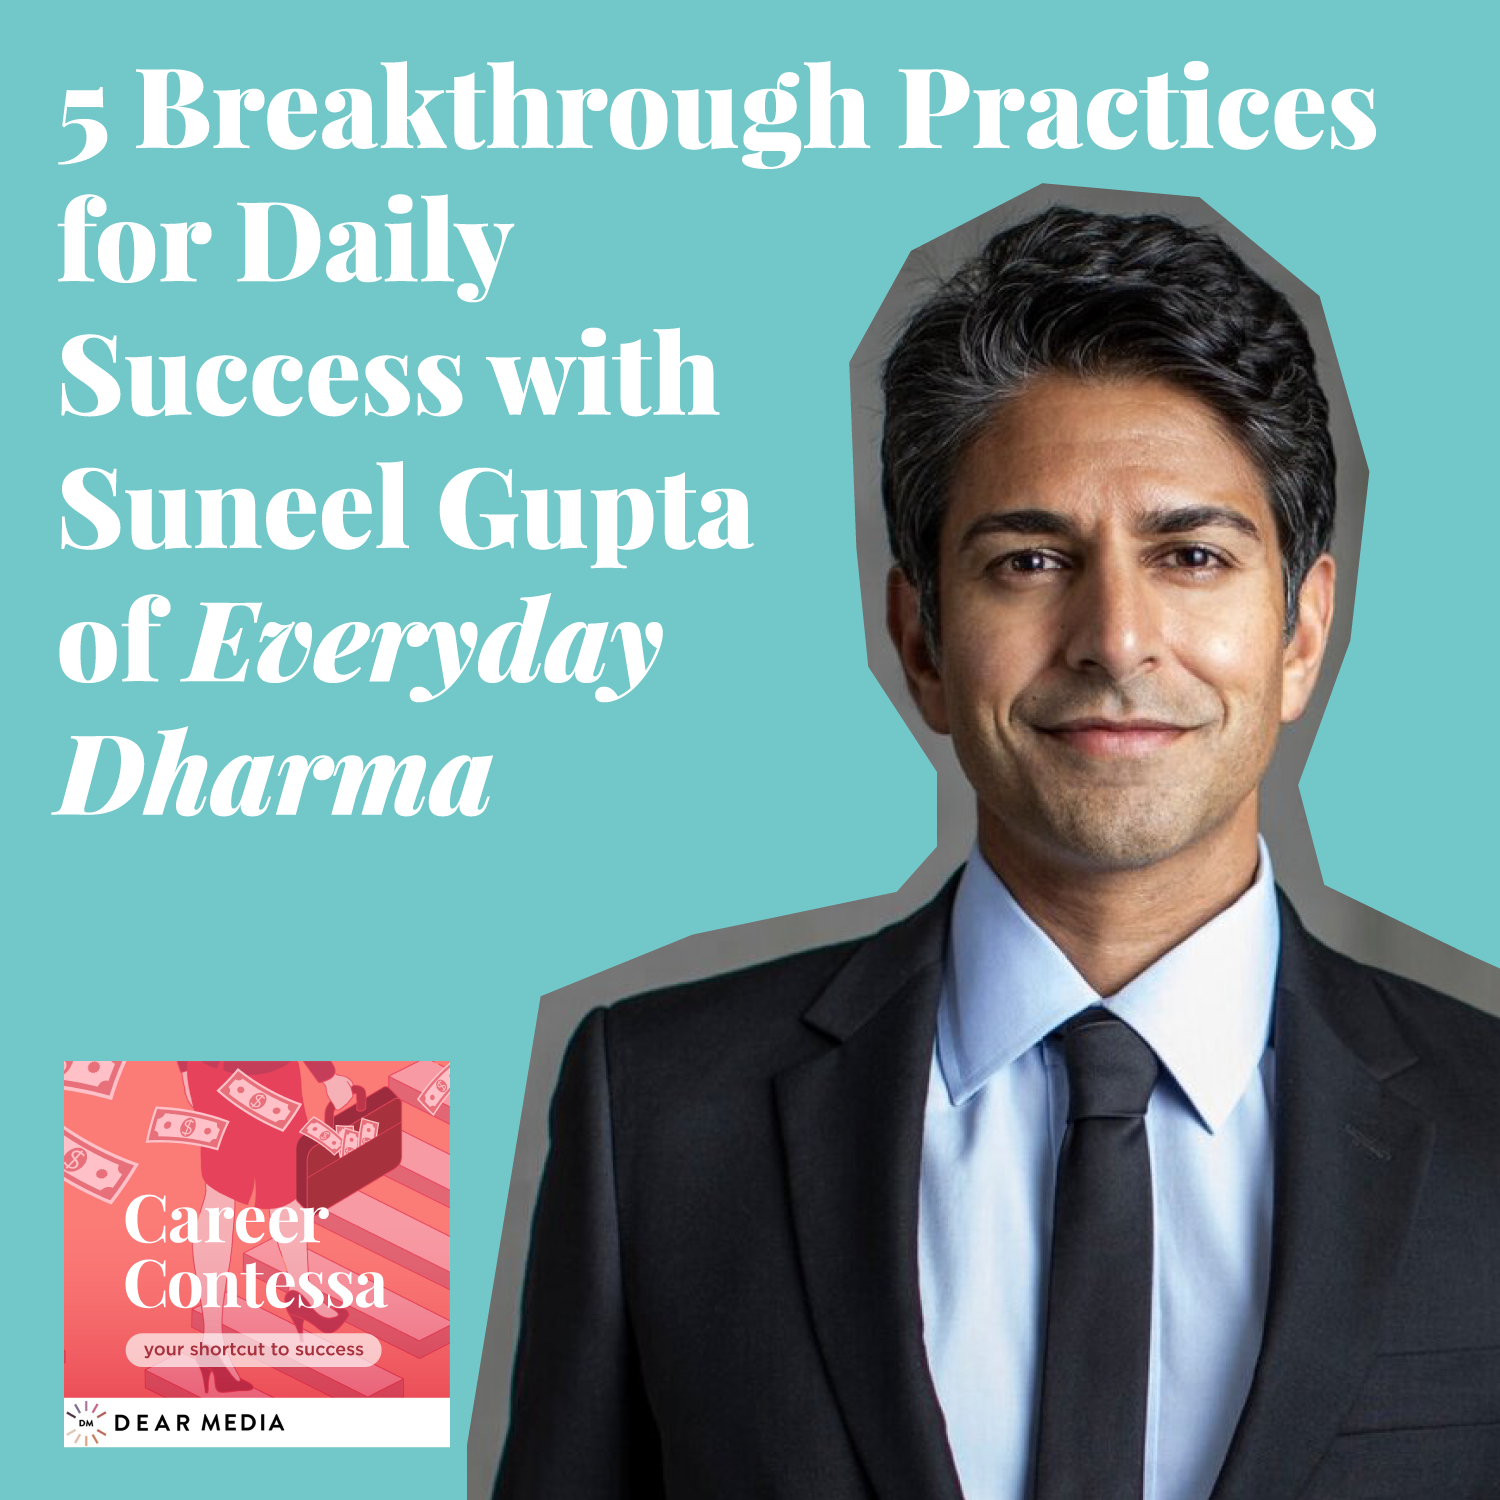 5 Breakthrough Practices for Daily Success with Suneel Gupta Image